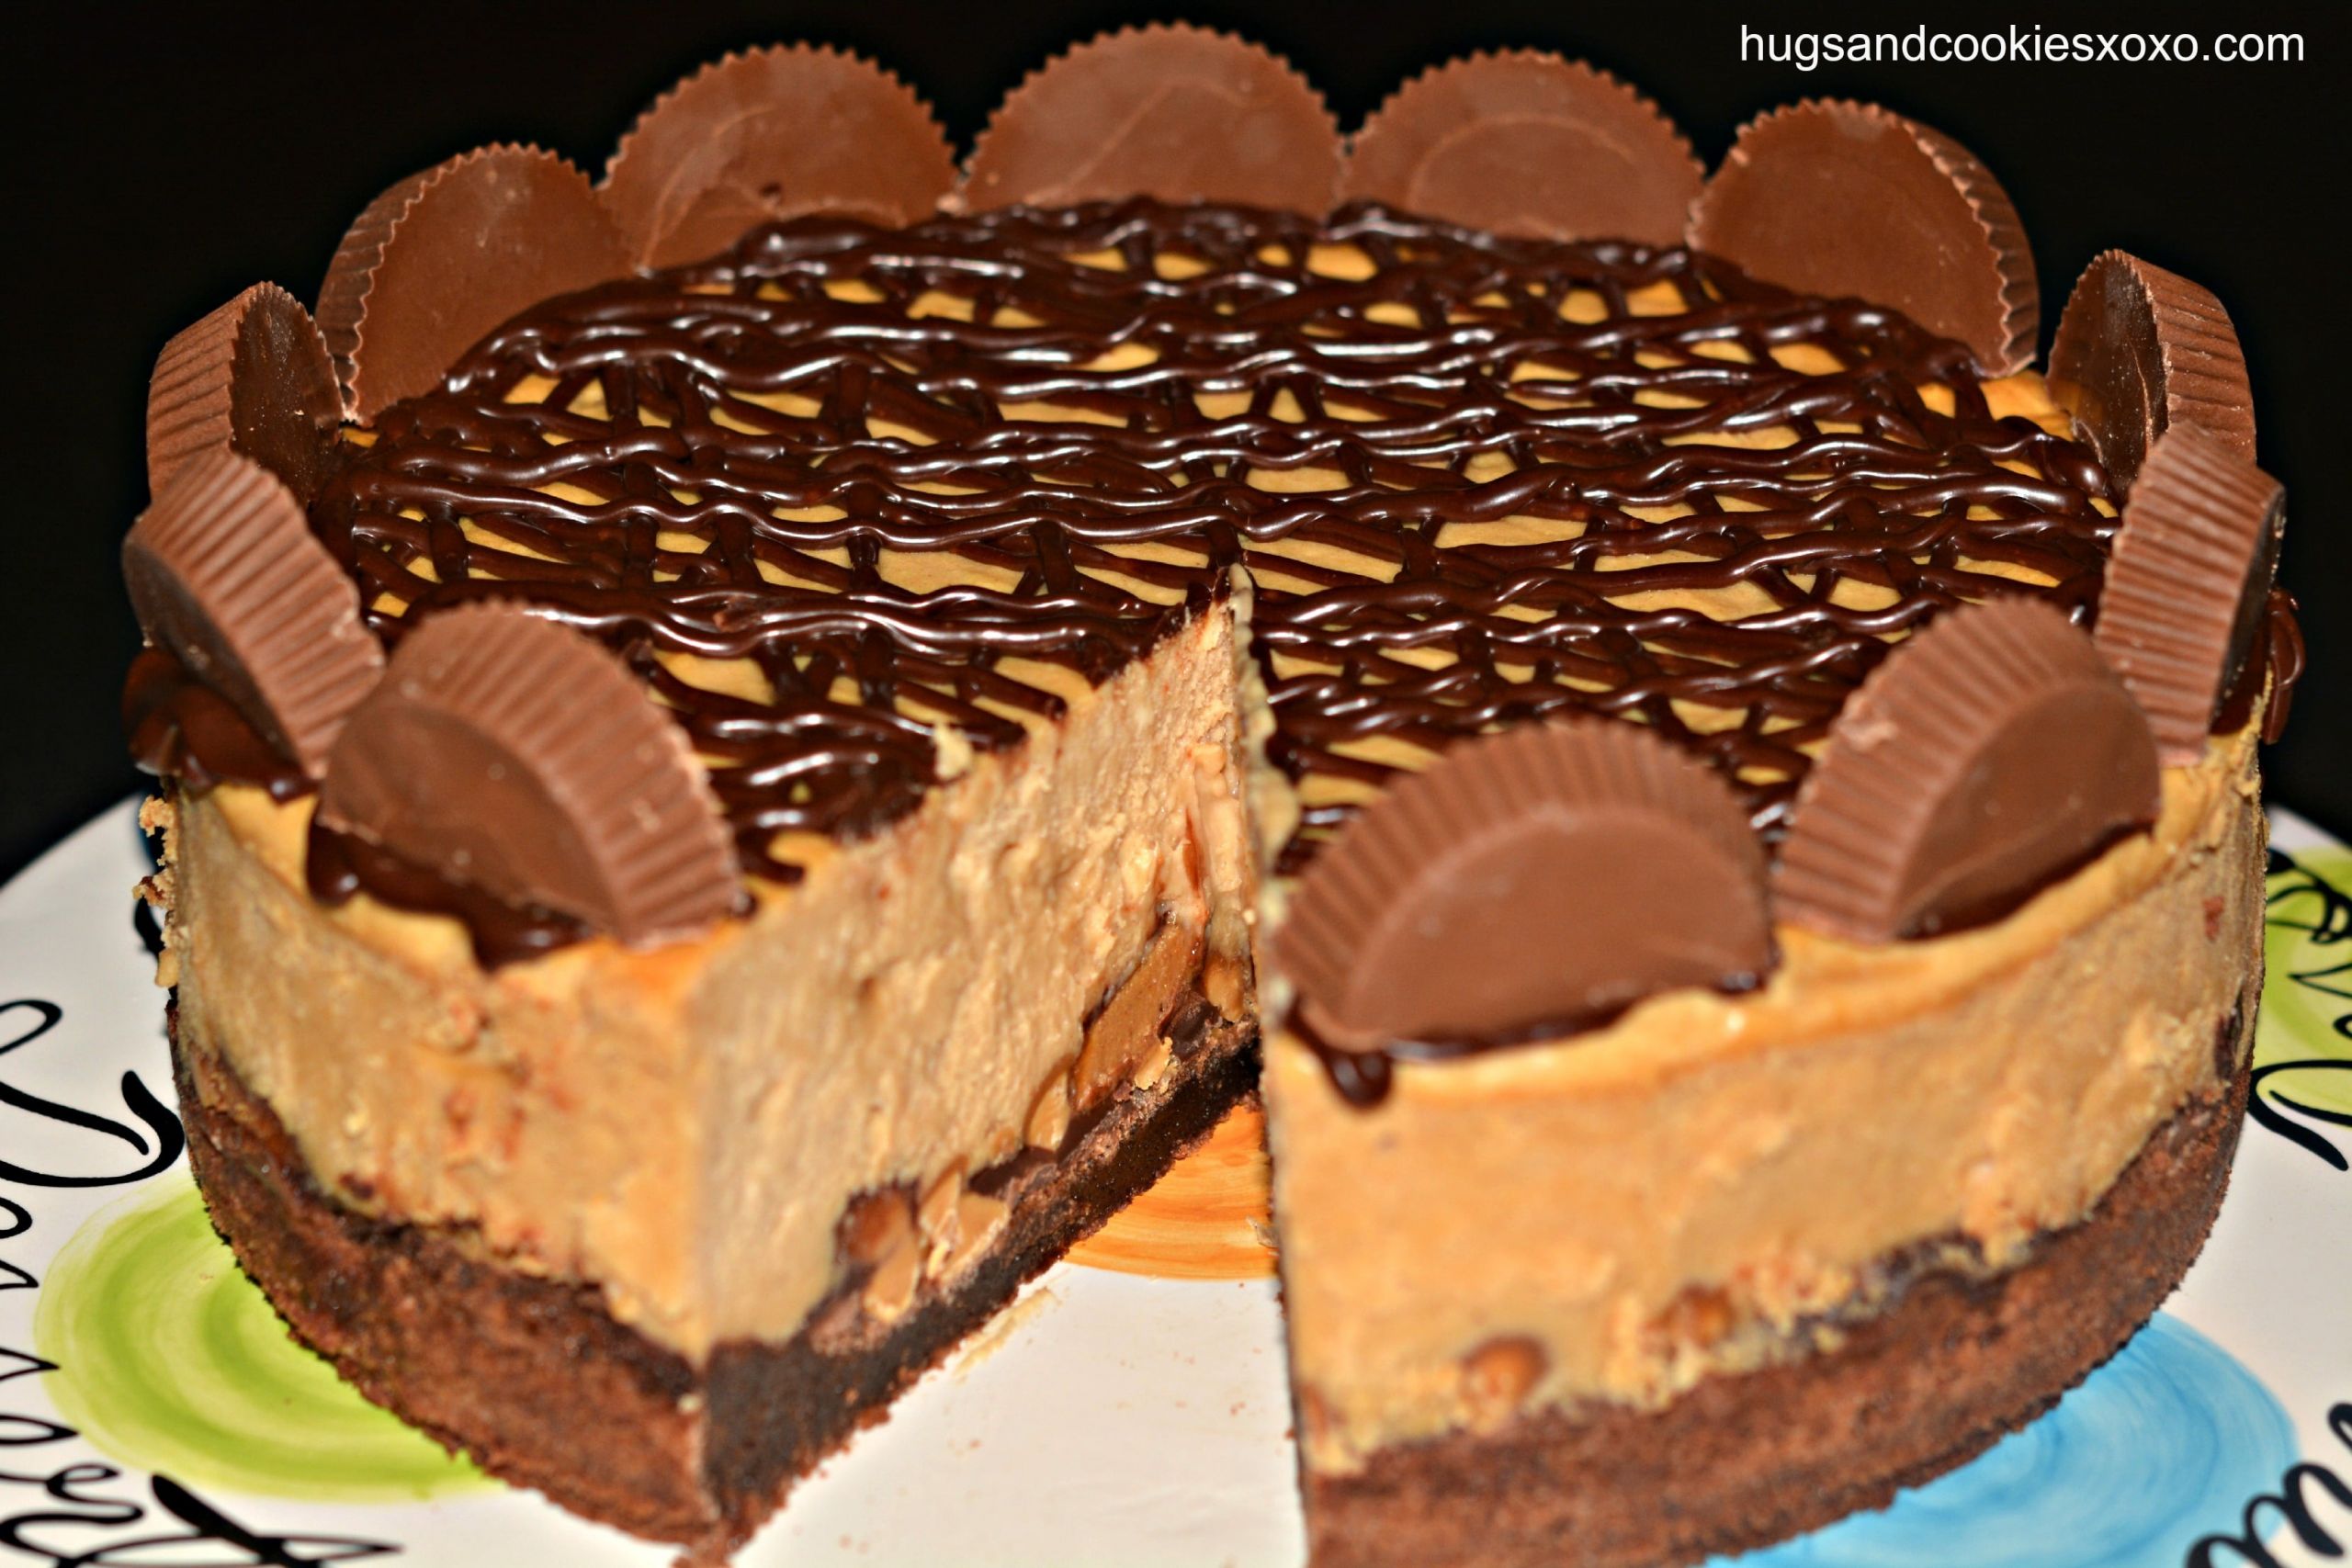 Reese Peanut Butter Cup Cookies Recipe
 Reese s Peanut Butter Cup Cheesecake A Brownie Crust